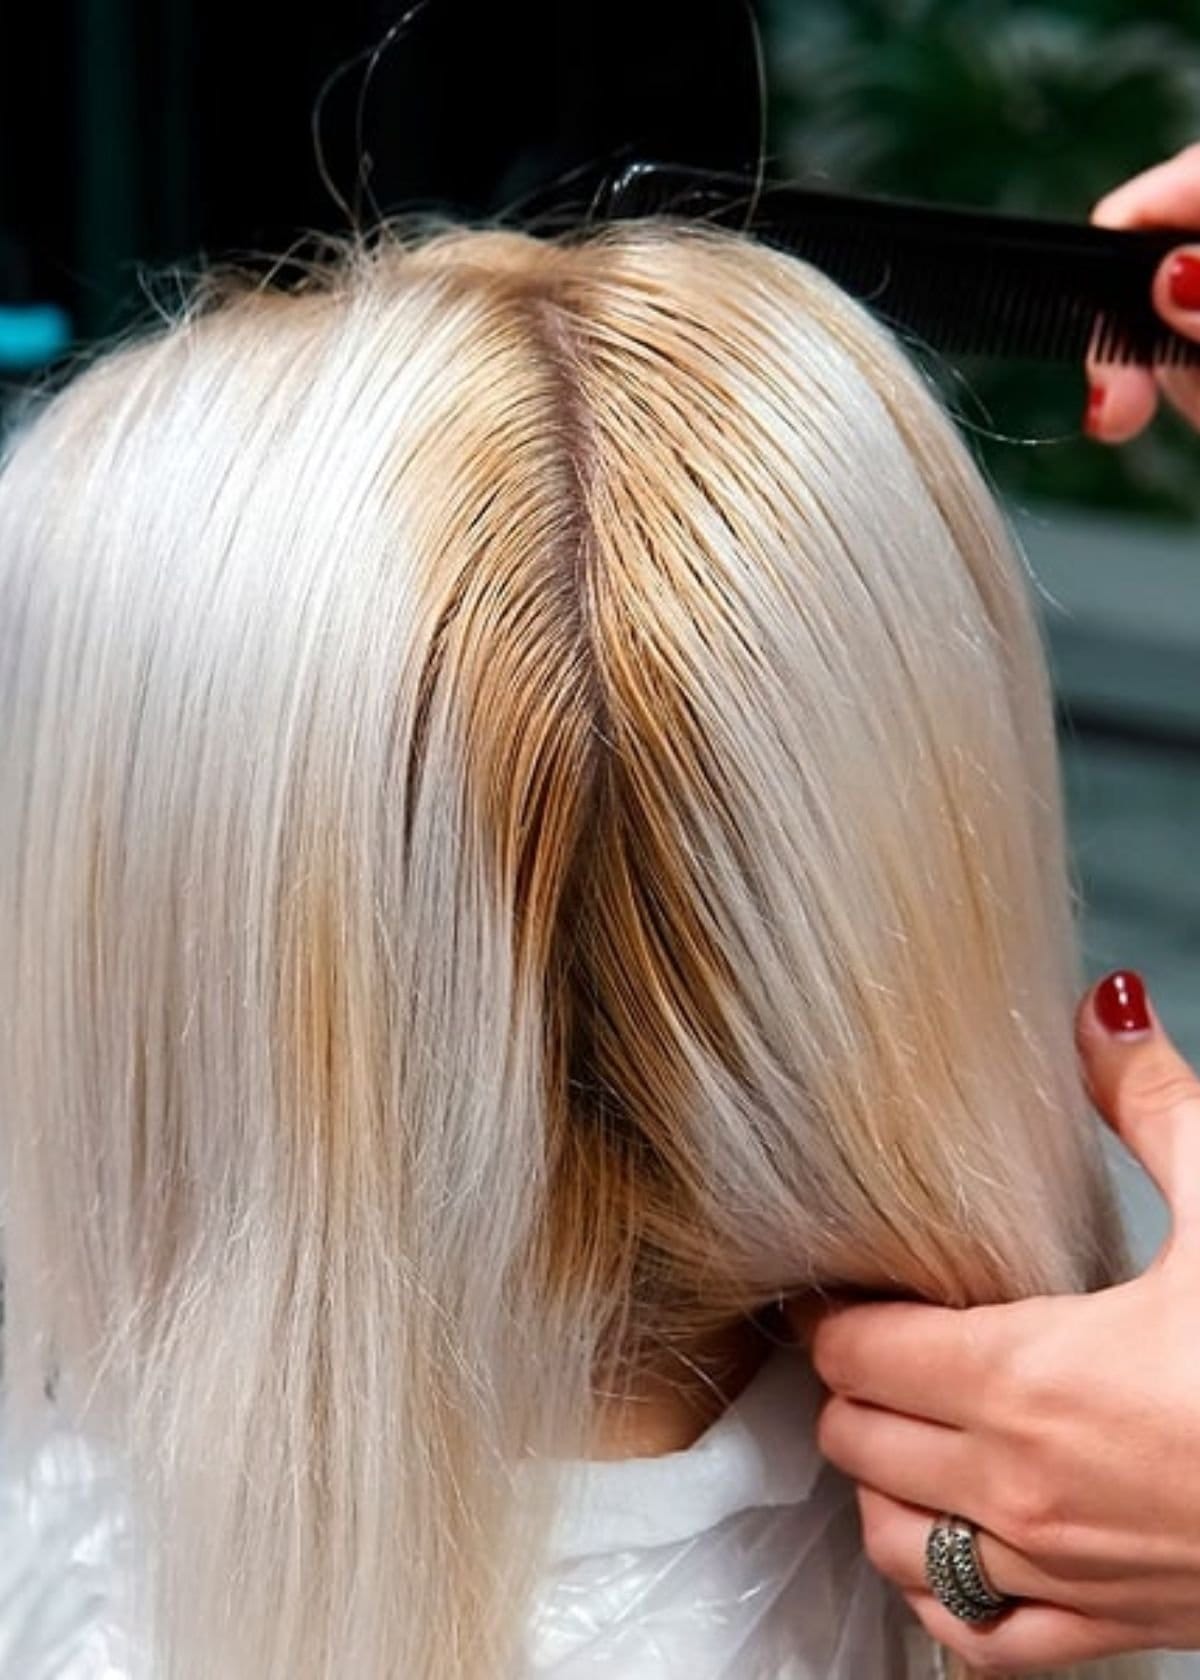 Will Toner Fix Uneven Bleached Hair? Learn From Expert